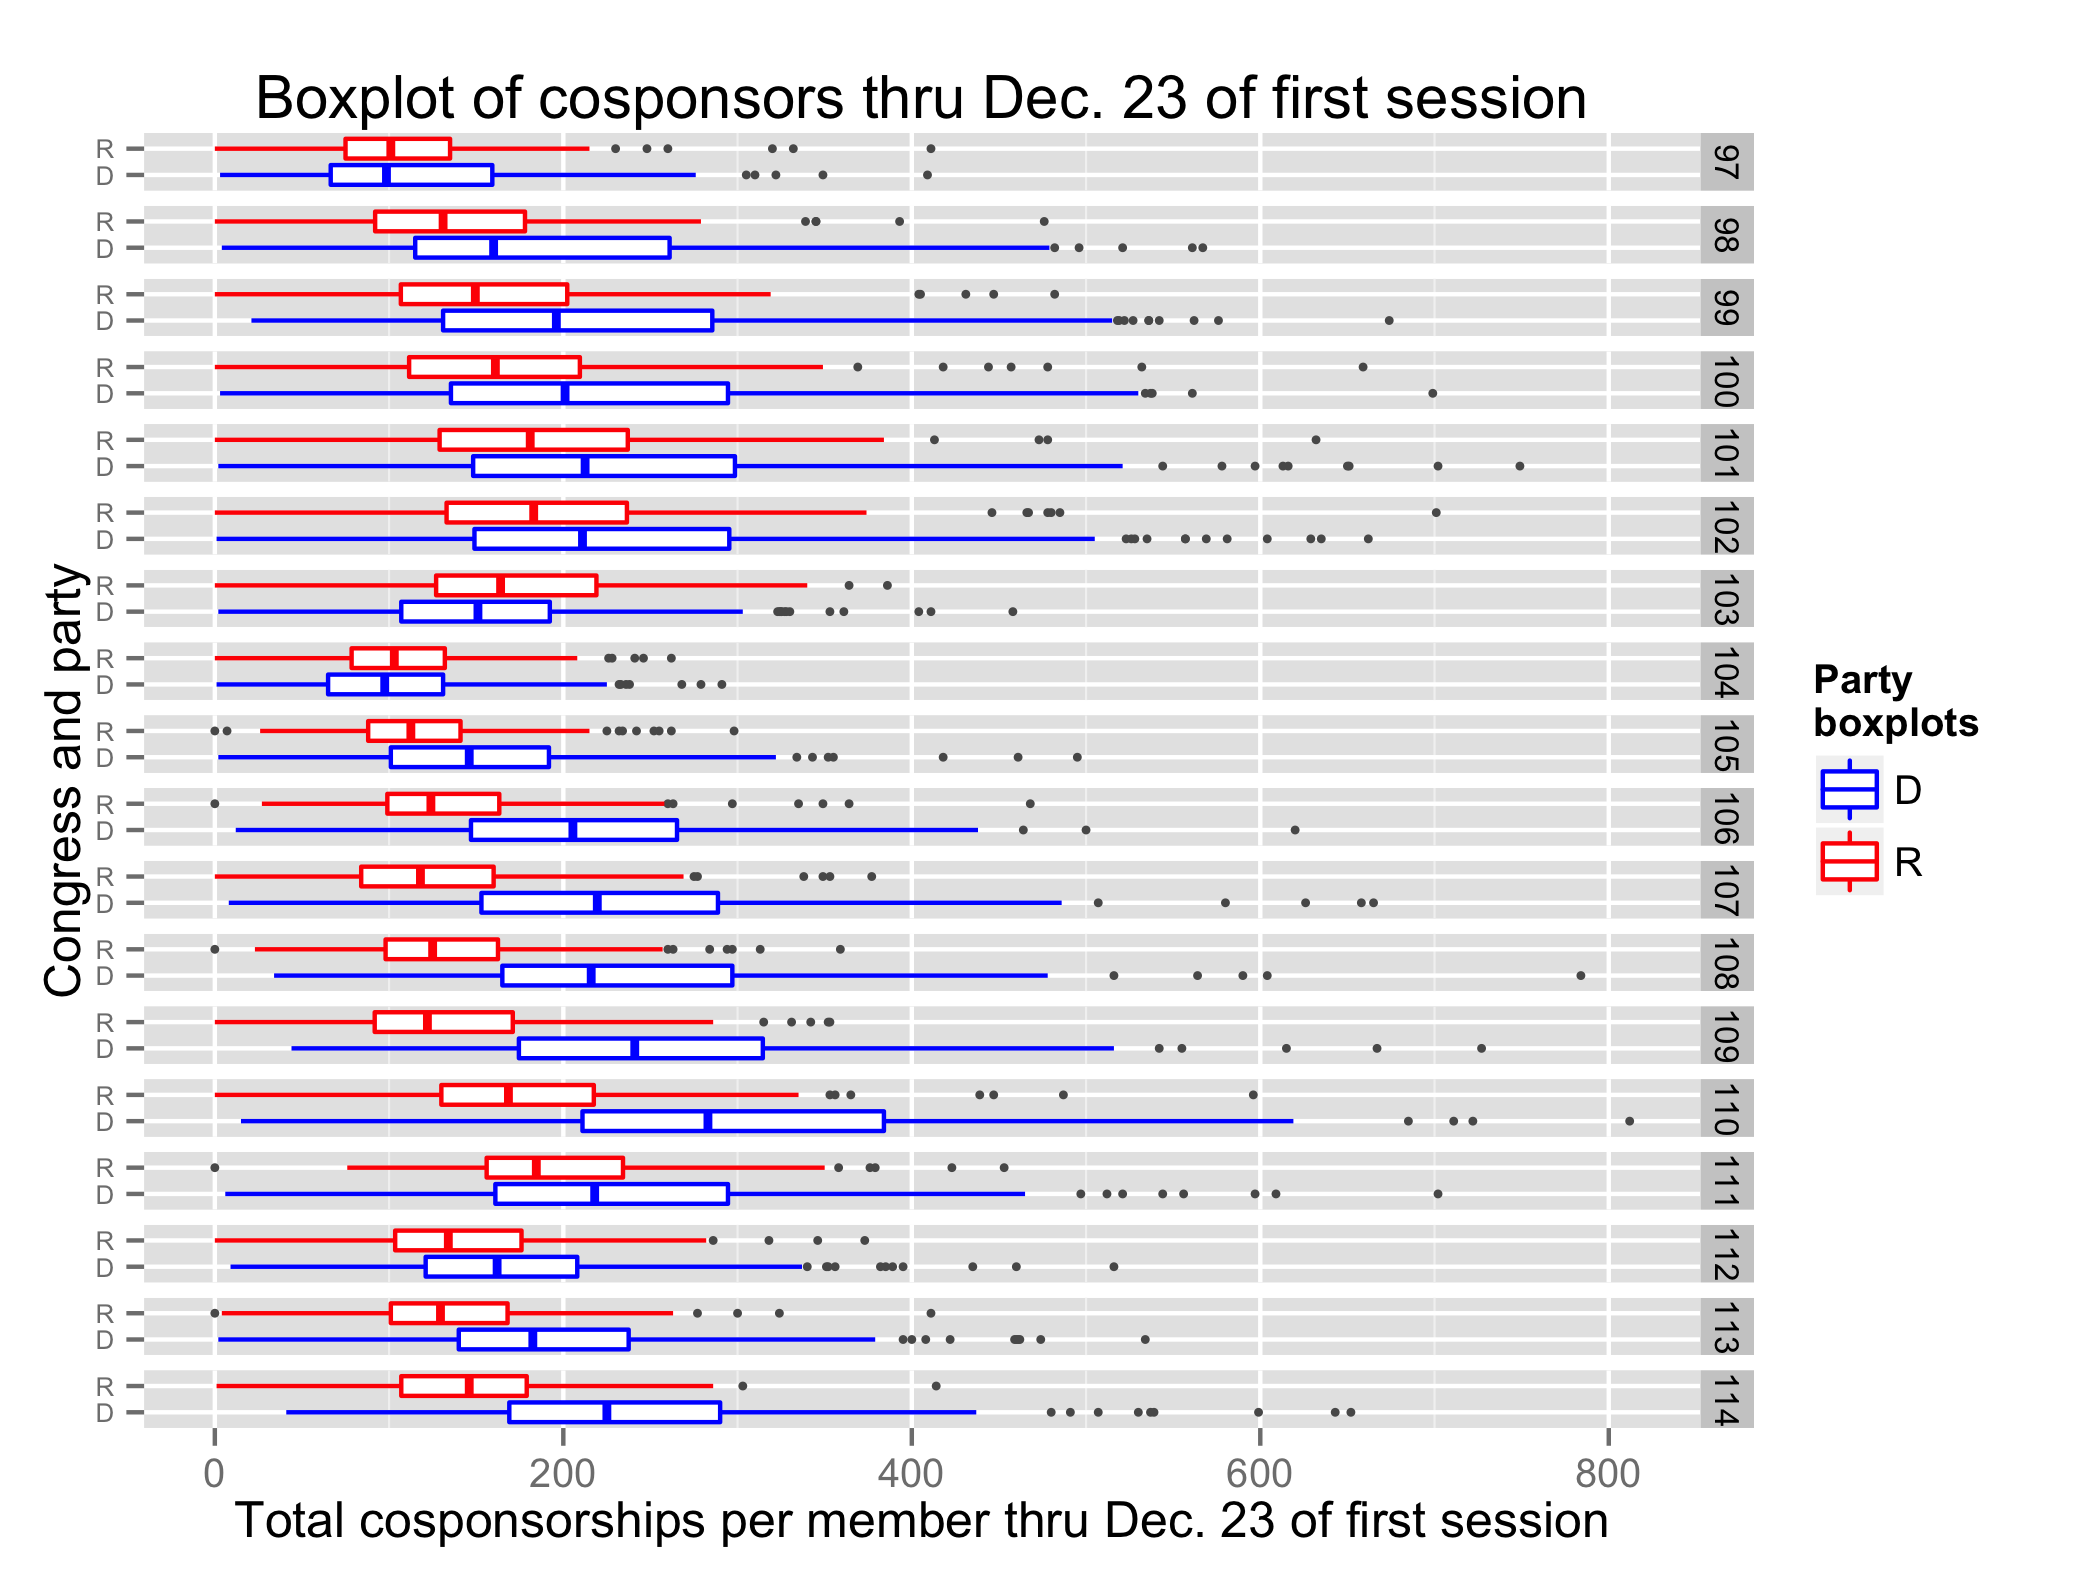 Boxplot of cosponsors by congress and party through Dec. 23 of the first session of each congress